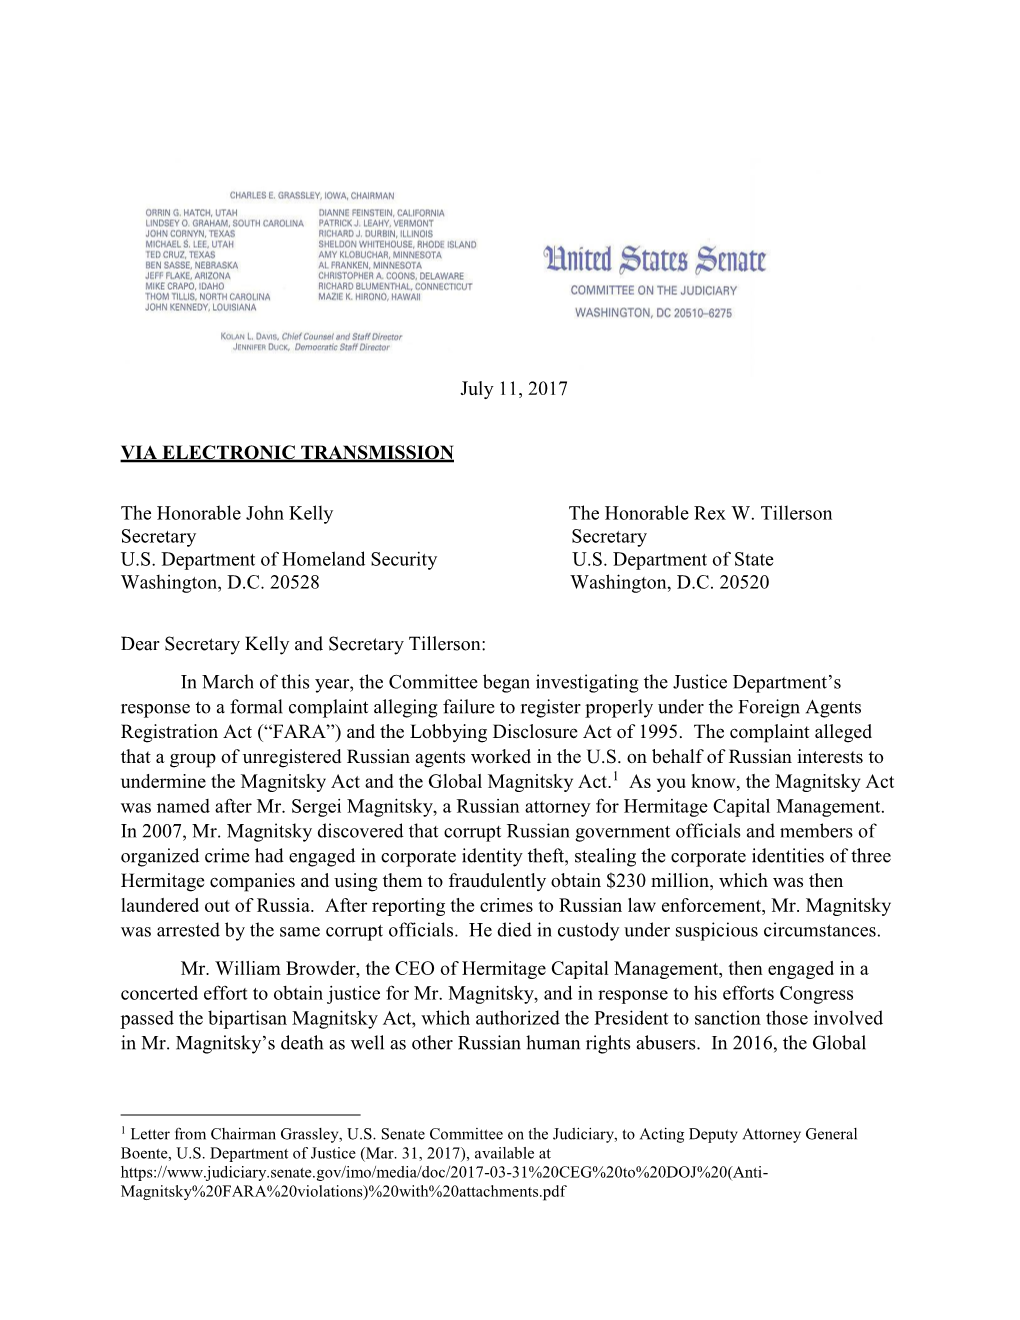 Letter from Chairman Grassley, U.S